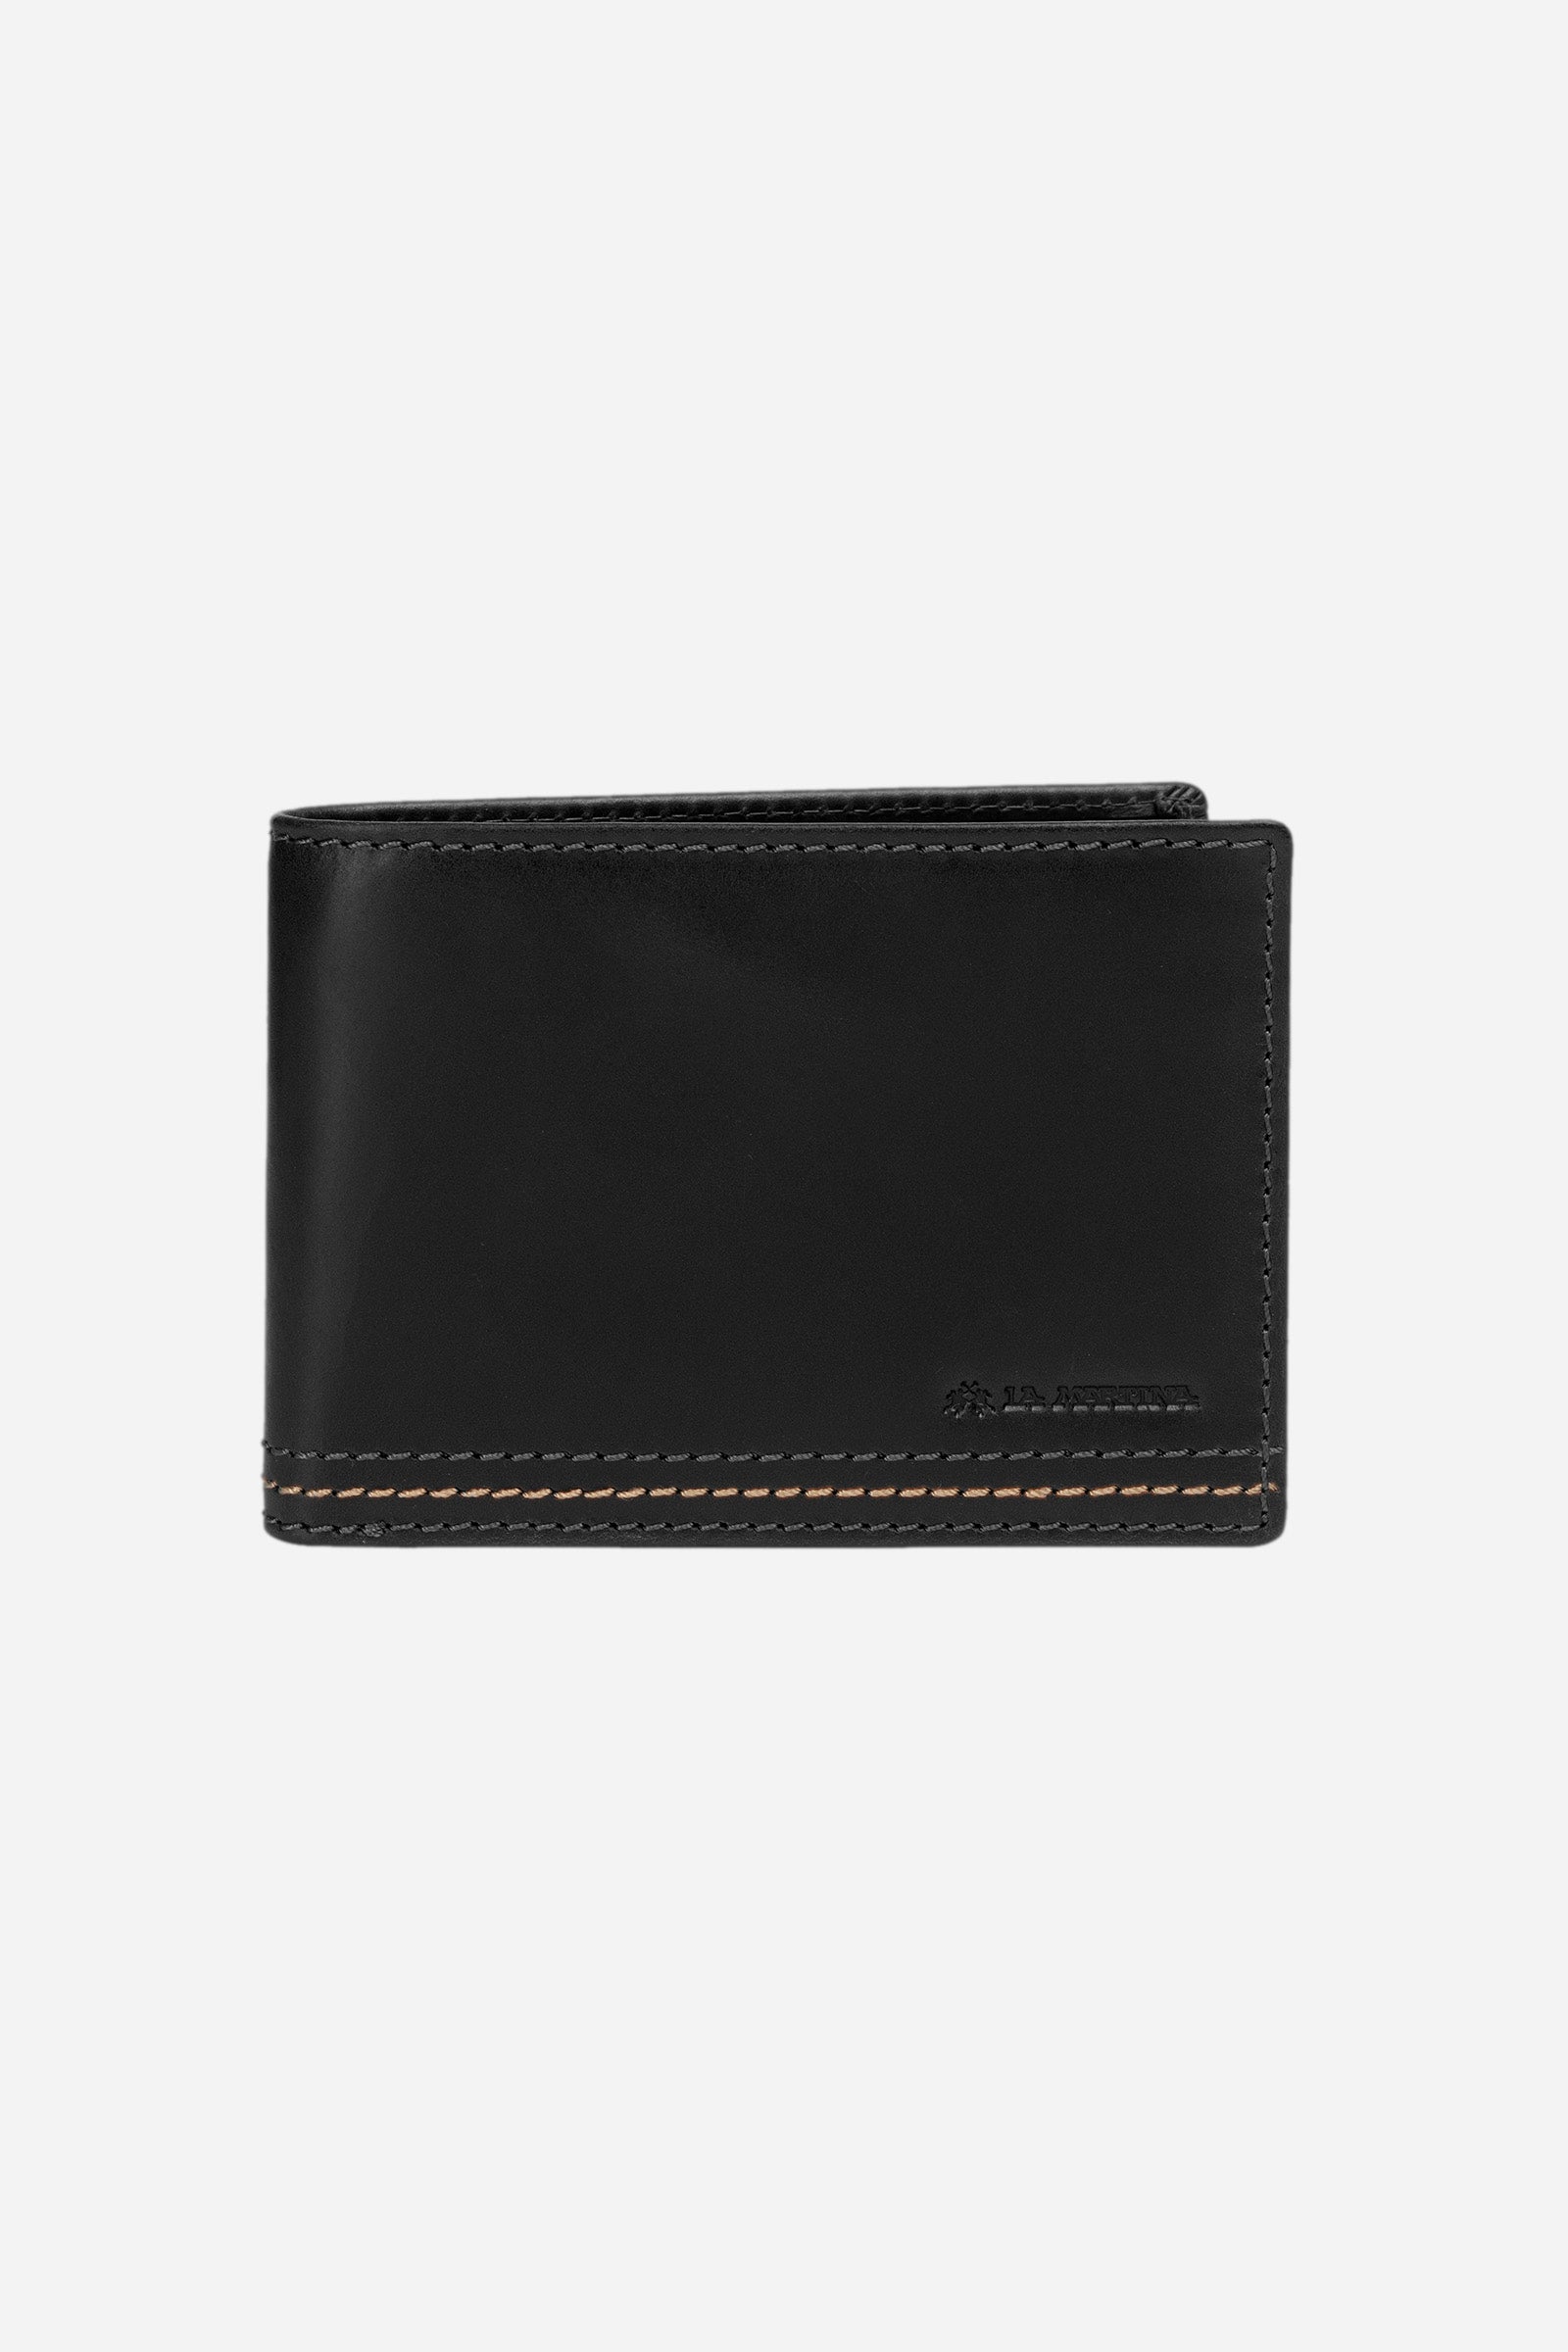 Men's leather wallet with coin purse - Axel